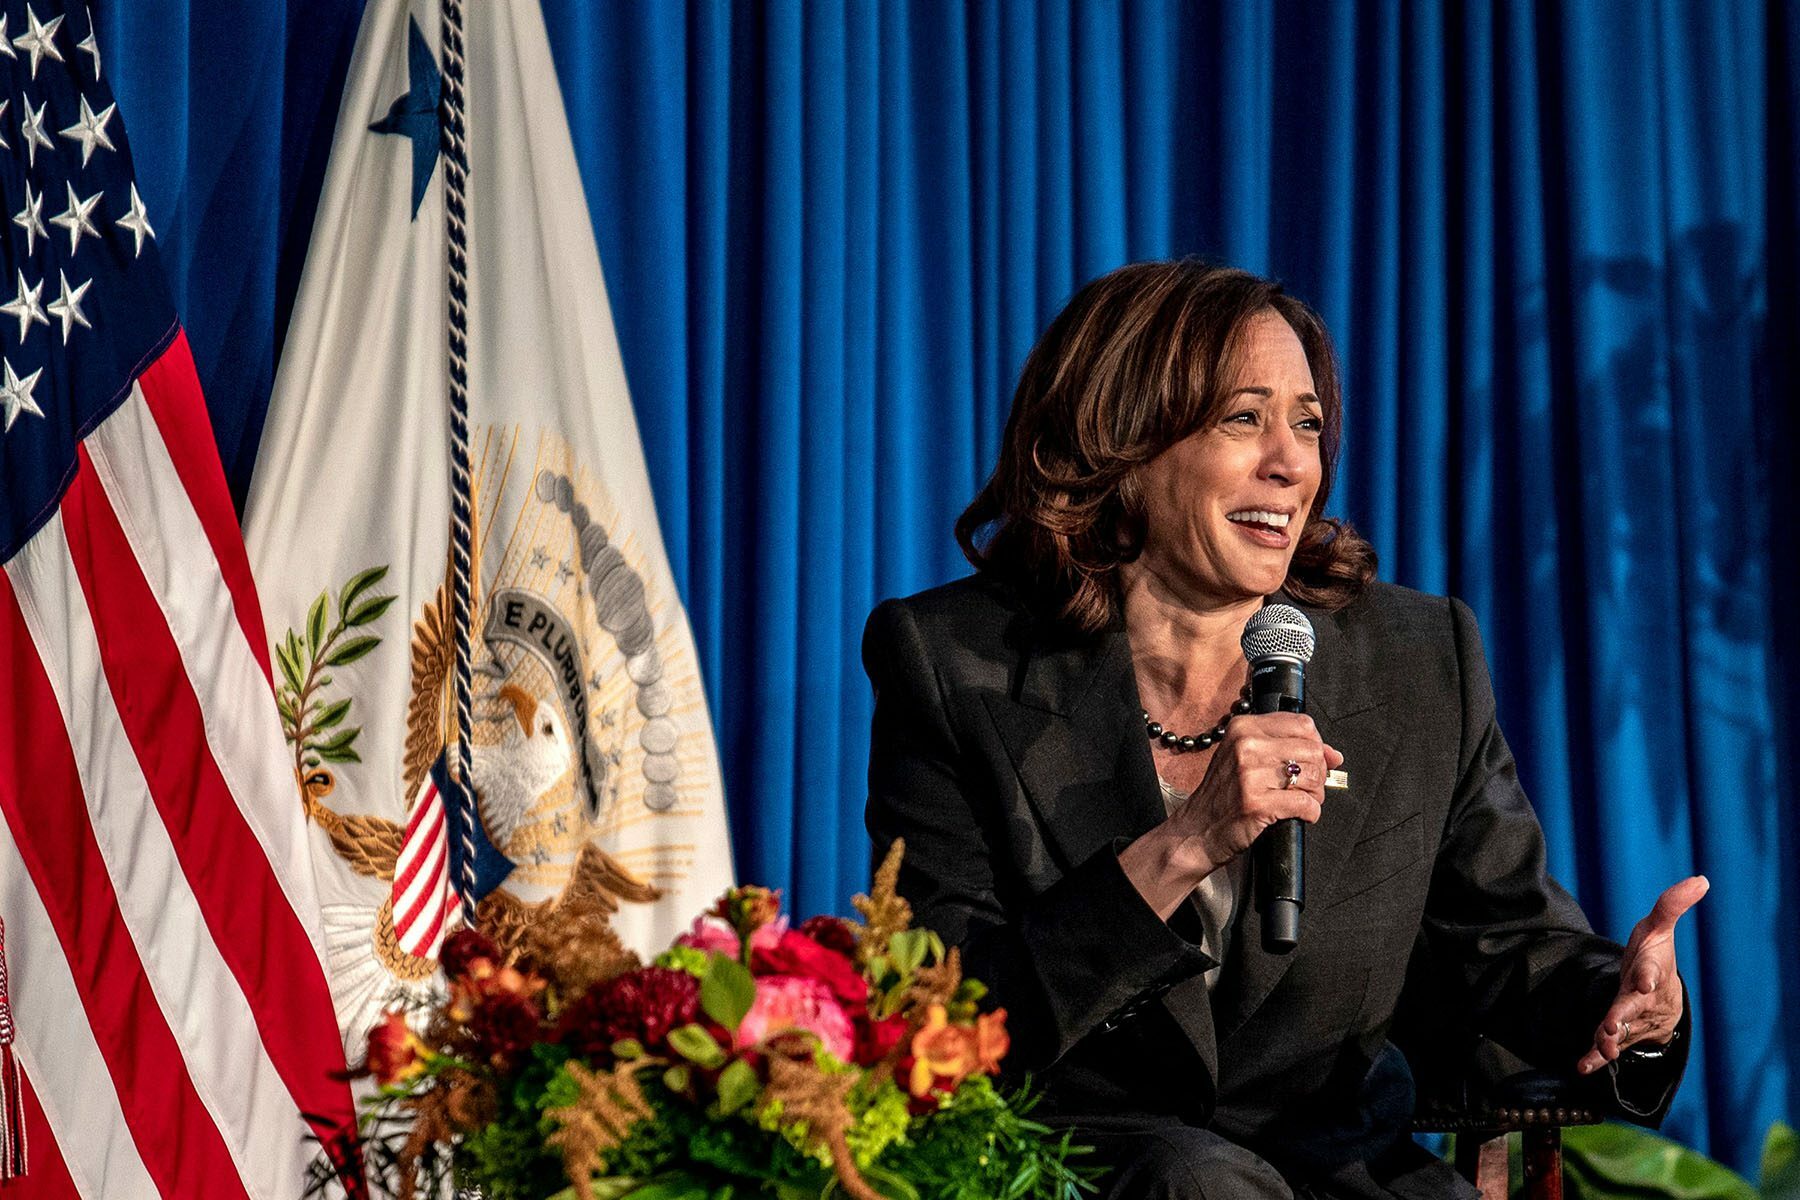 Kamala Harris speaks into a microphone during a discussion on reproductive rights.